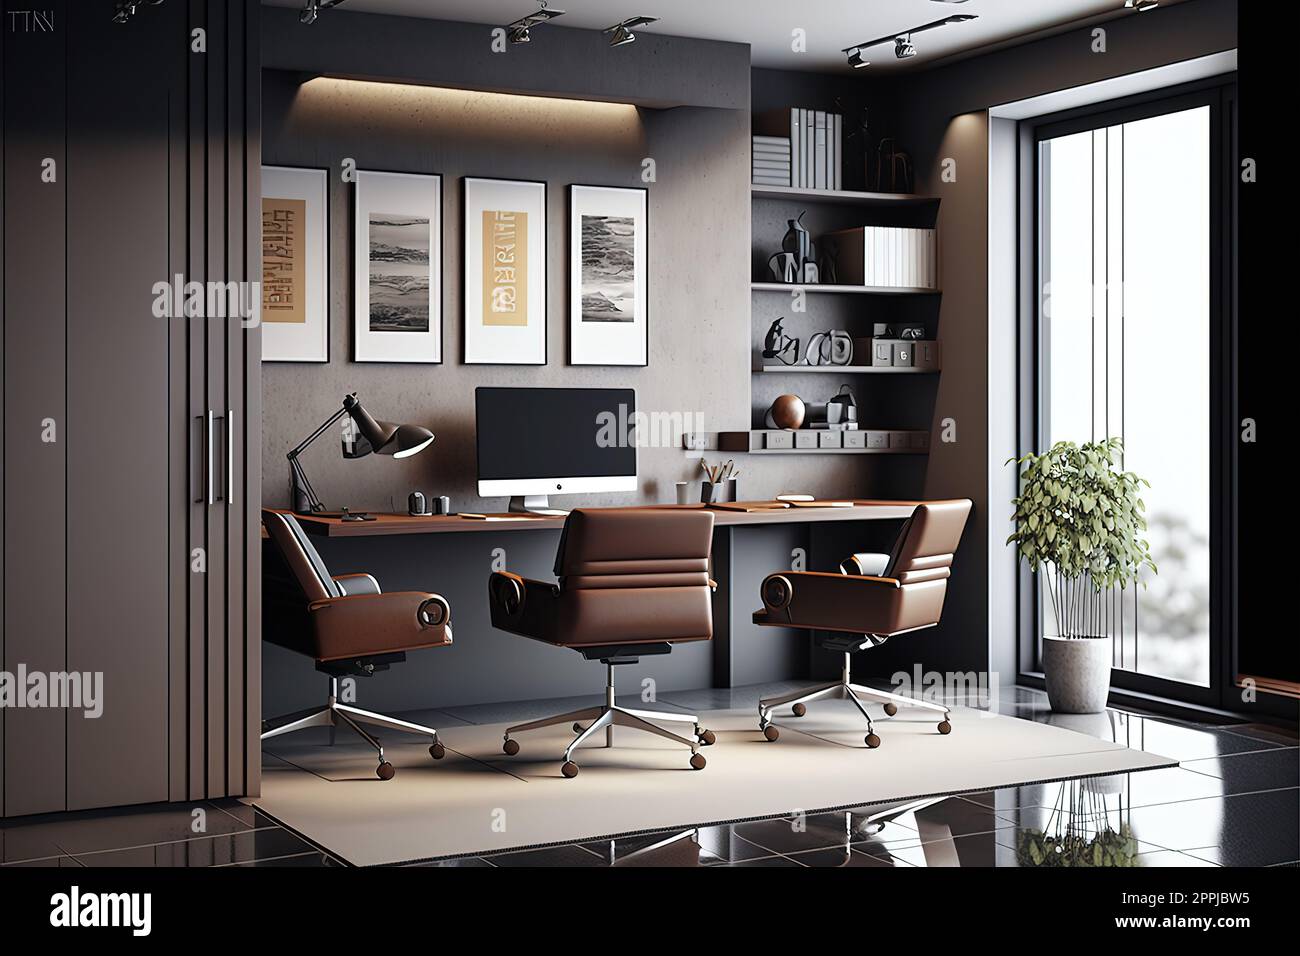 Corner of grey and brown office interior with desk, stylish niche, cabinets, panoramic view, three rolling chairs and concrete floor. Concept of modern CEO work place design Stock Photo